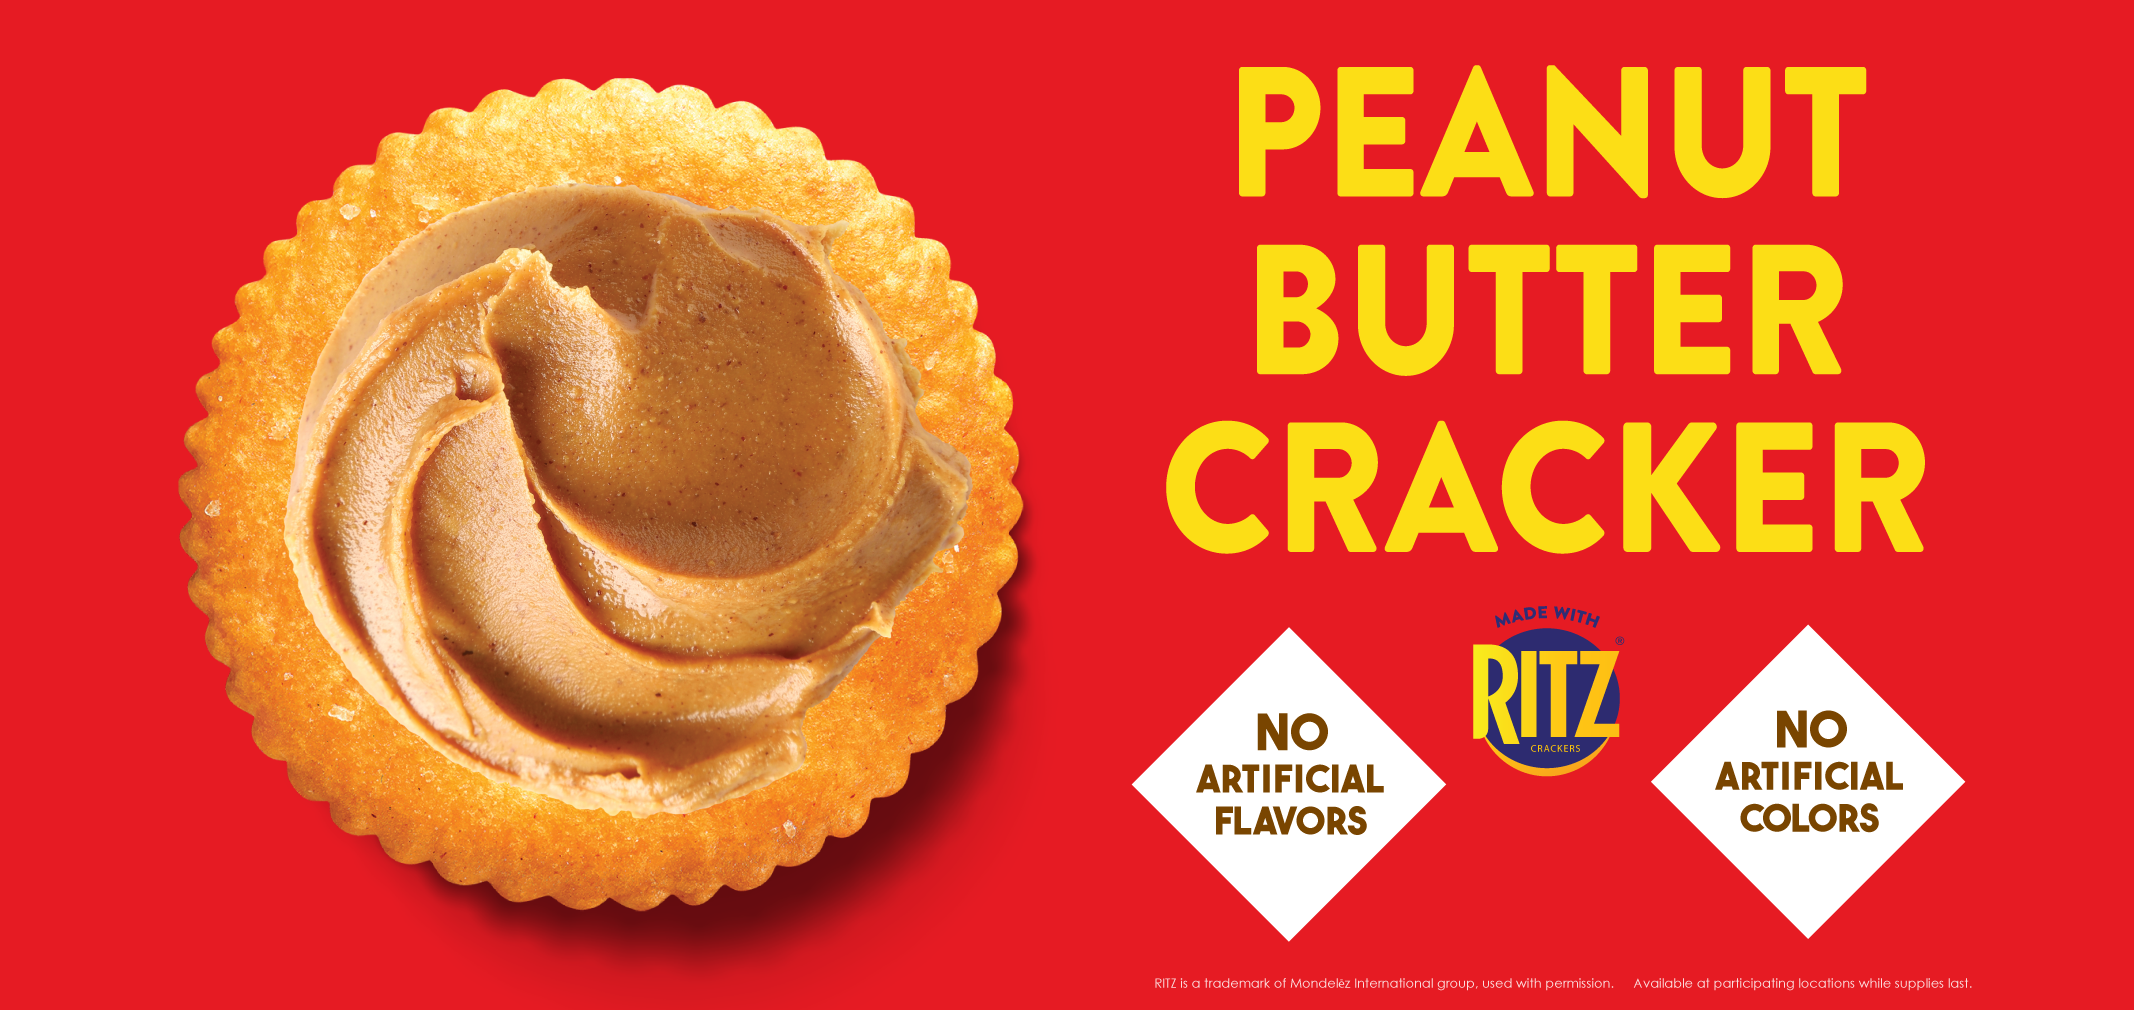 peanut butter cracker made with ritz crackers label image